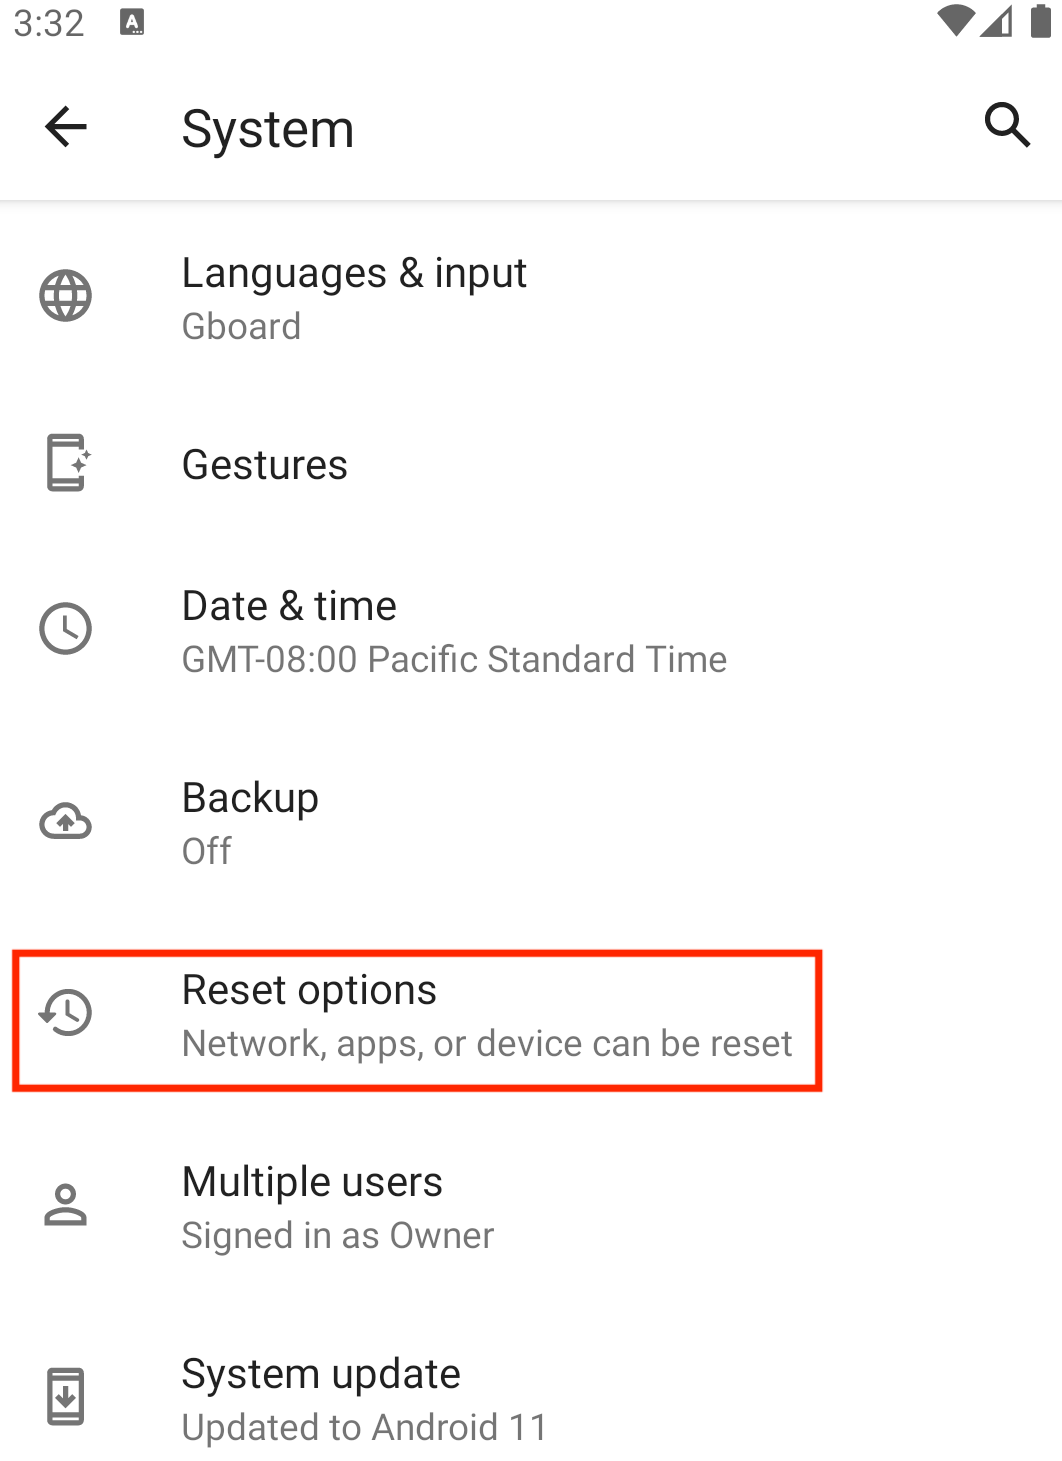 Open Reset Options in the System Menu of the Android Phone Settings